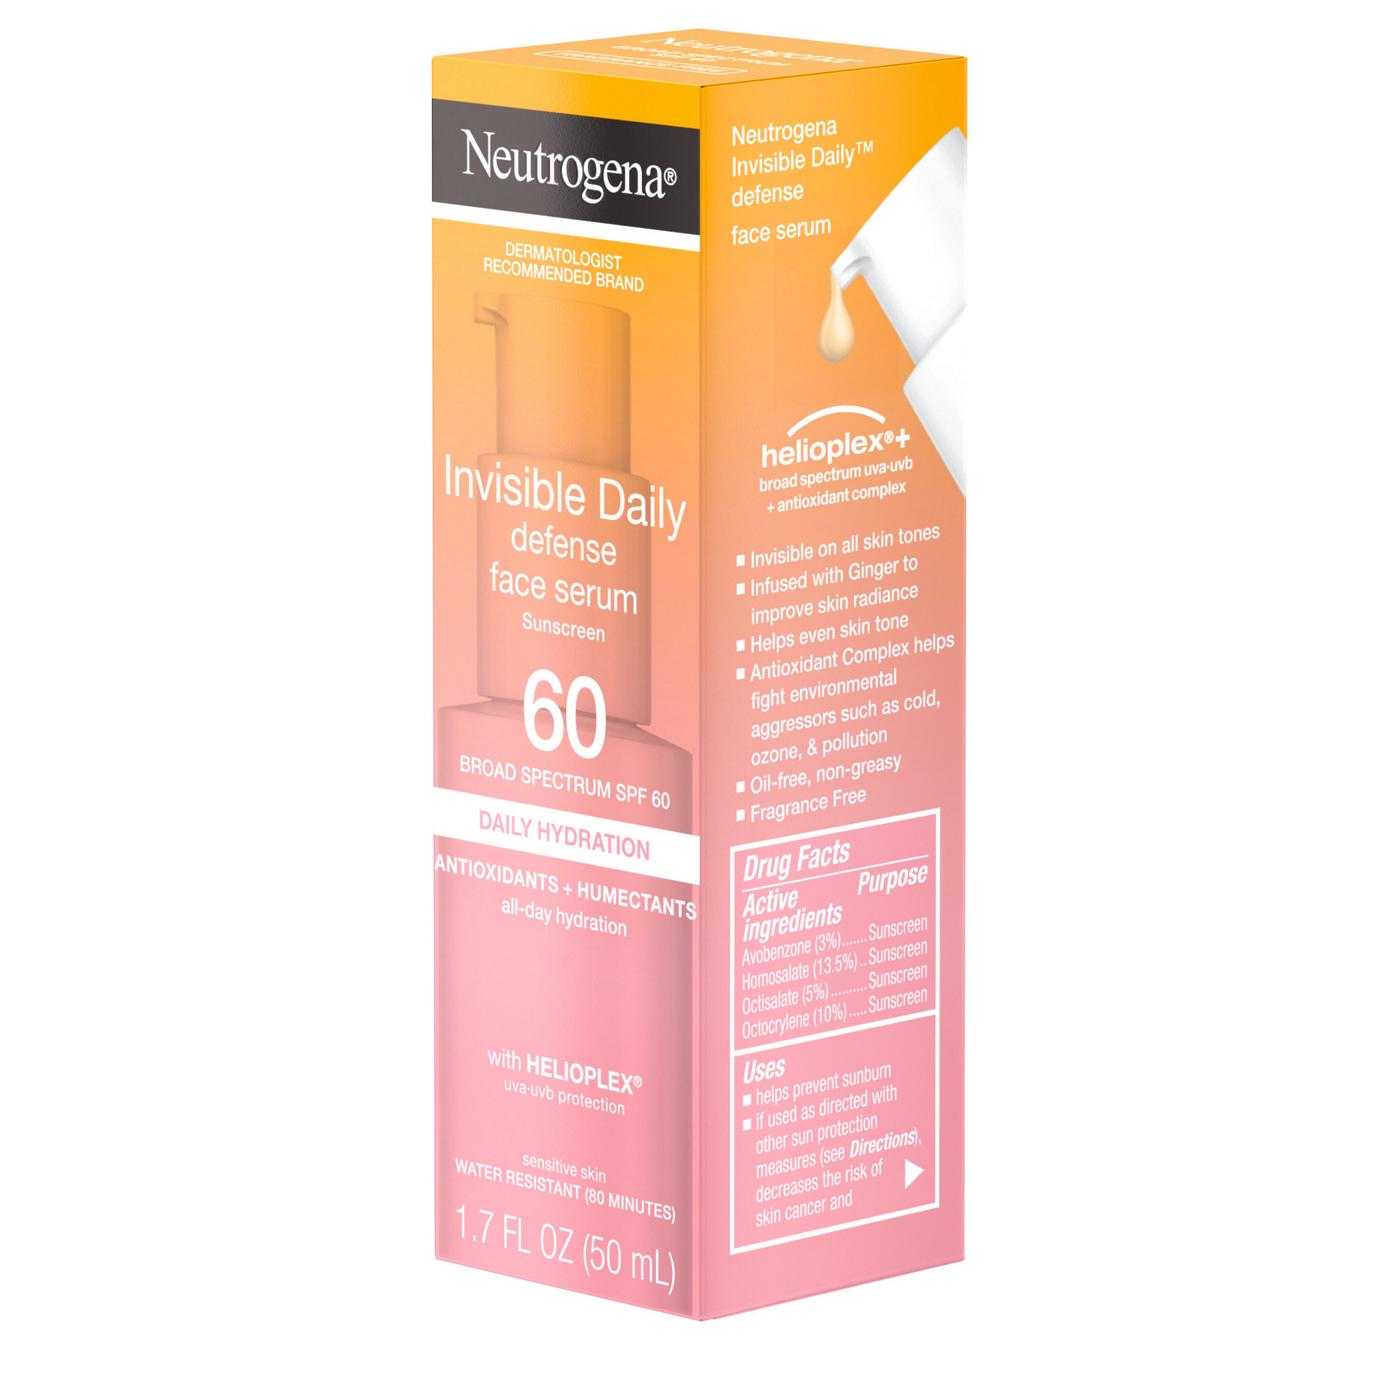 Neutrogena Invisible Daily Defense Face Serum Sunscreen - SPF 60+; image 3 of 8